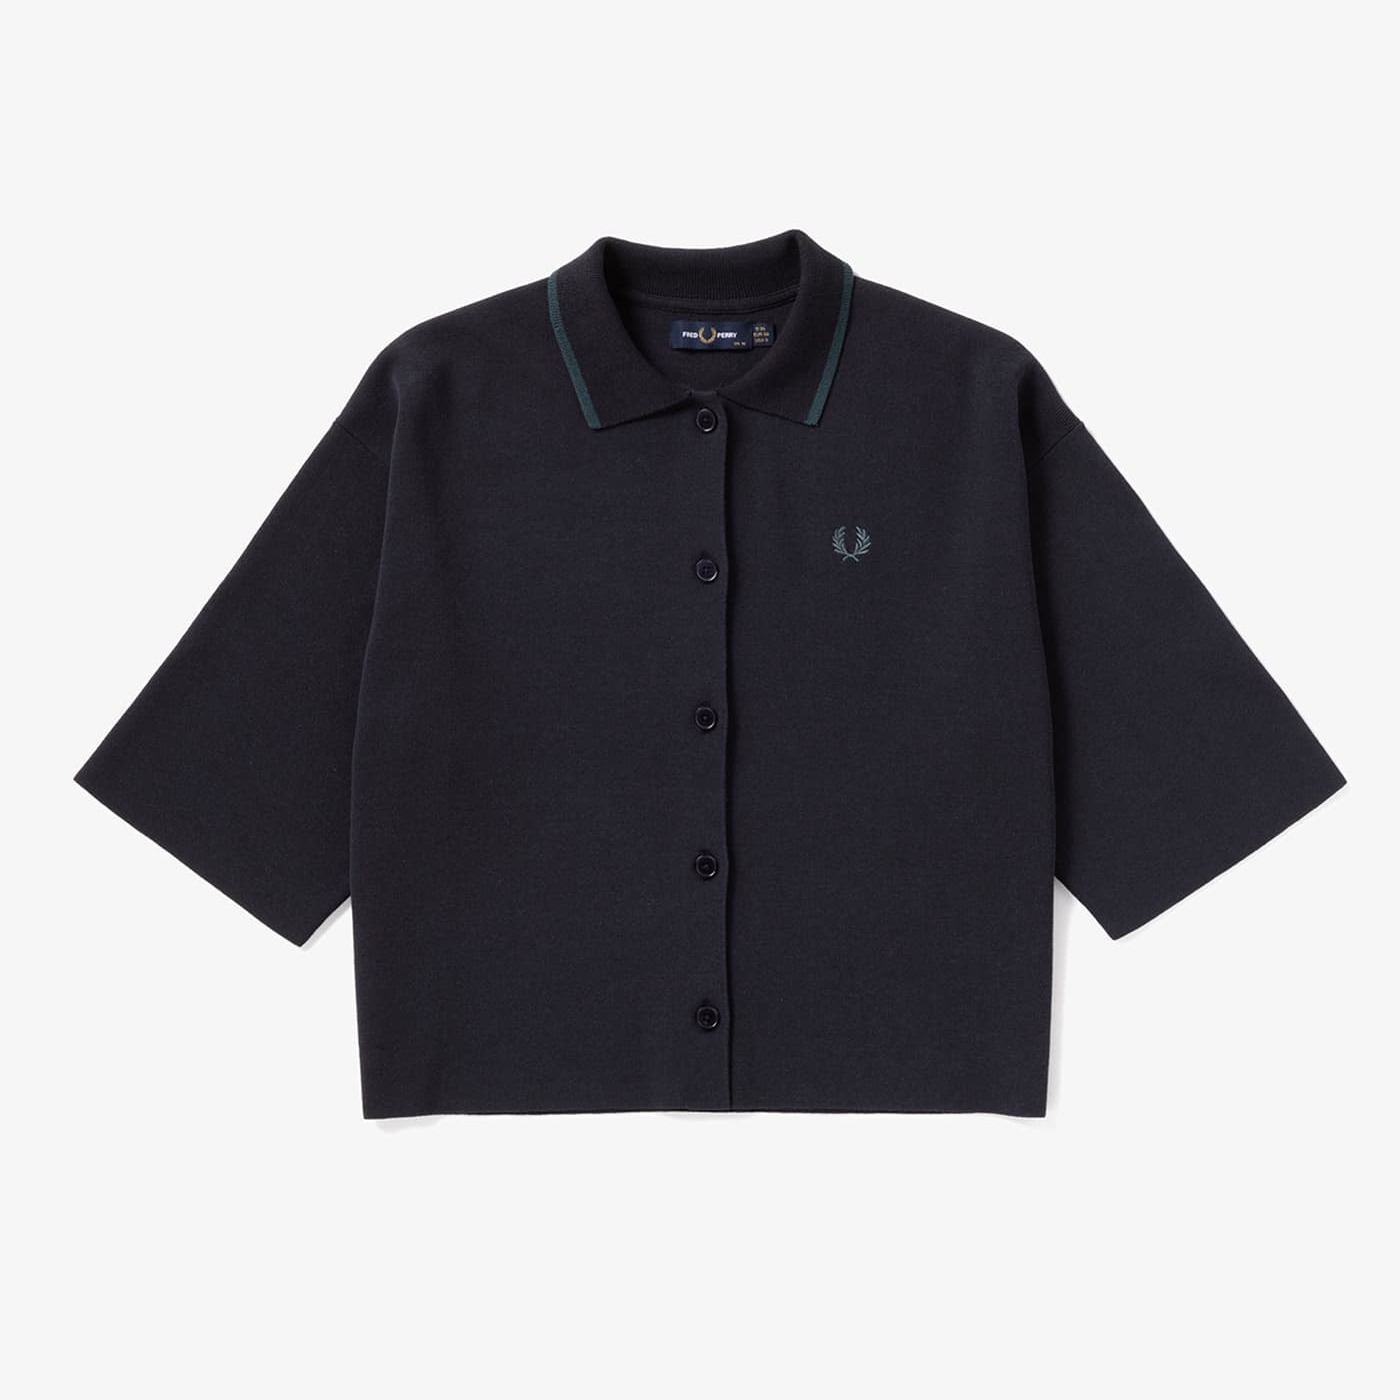 FRED PERRY Short Sleeved Knitted Shirt柄デザインロゴワンポイント